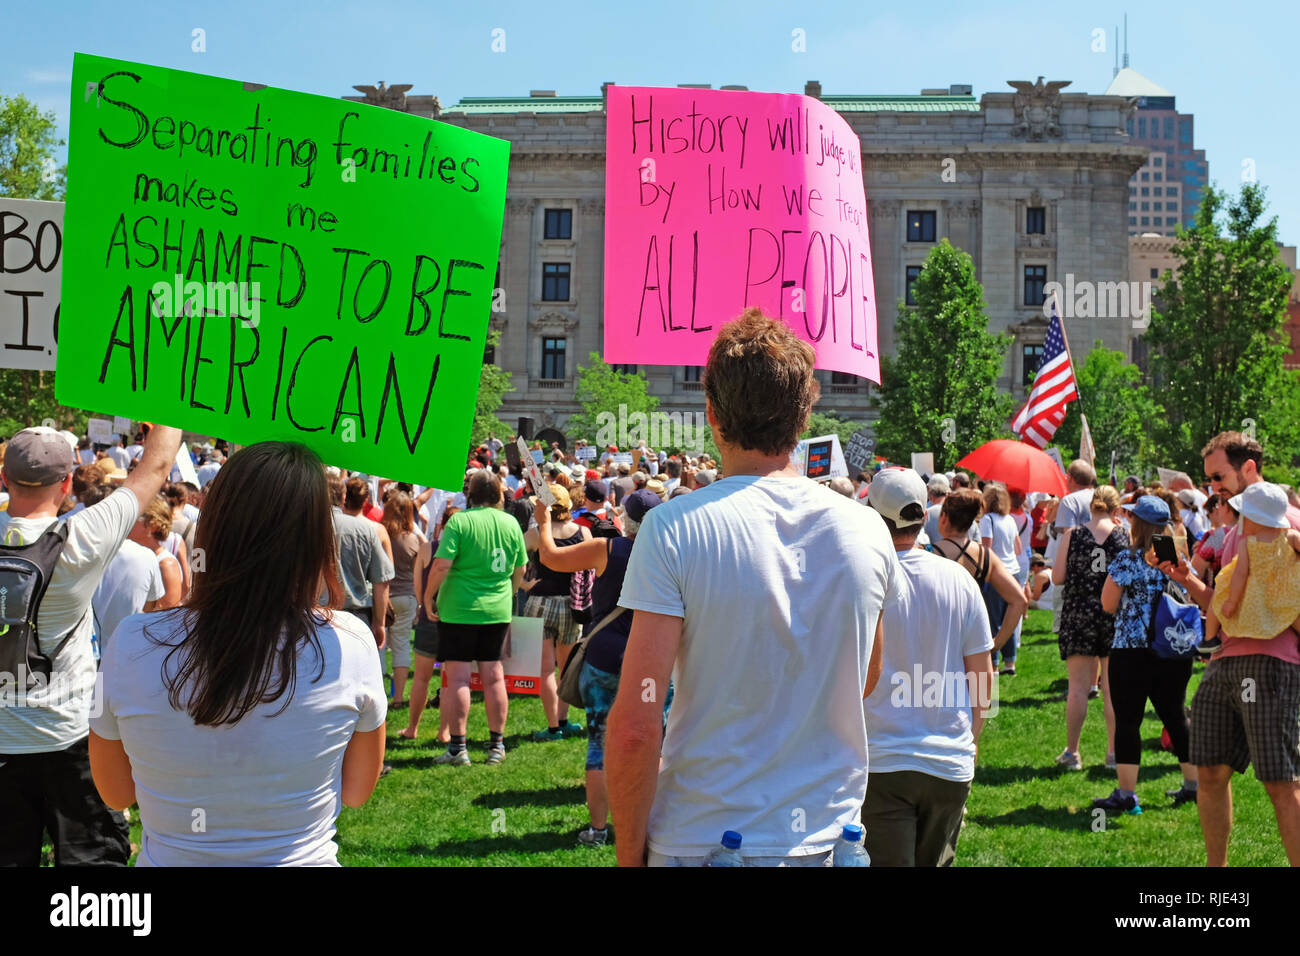 Protesters in Cleveland, Ohio, USA rally against Trump immigration policies separating families at the US border. Stock Photo